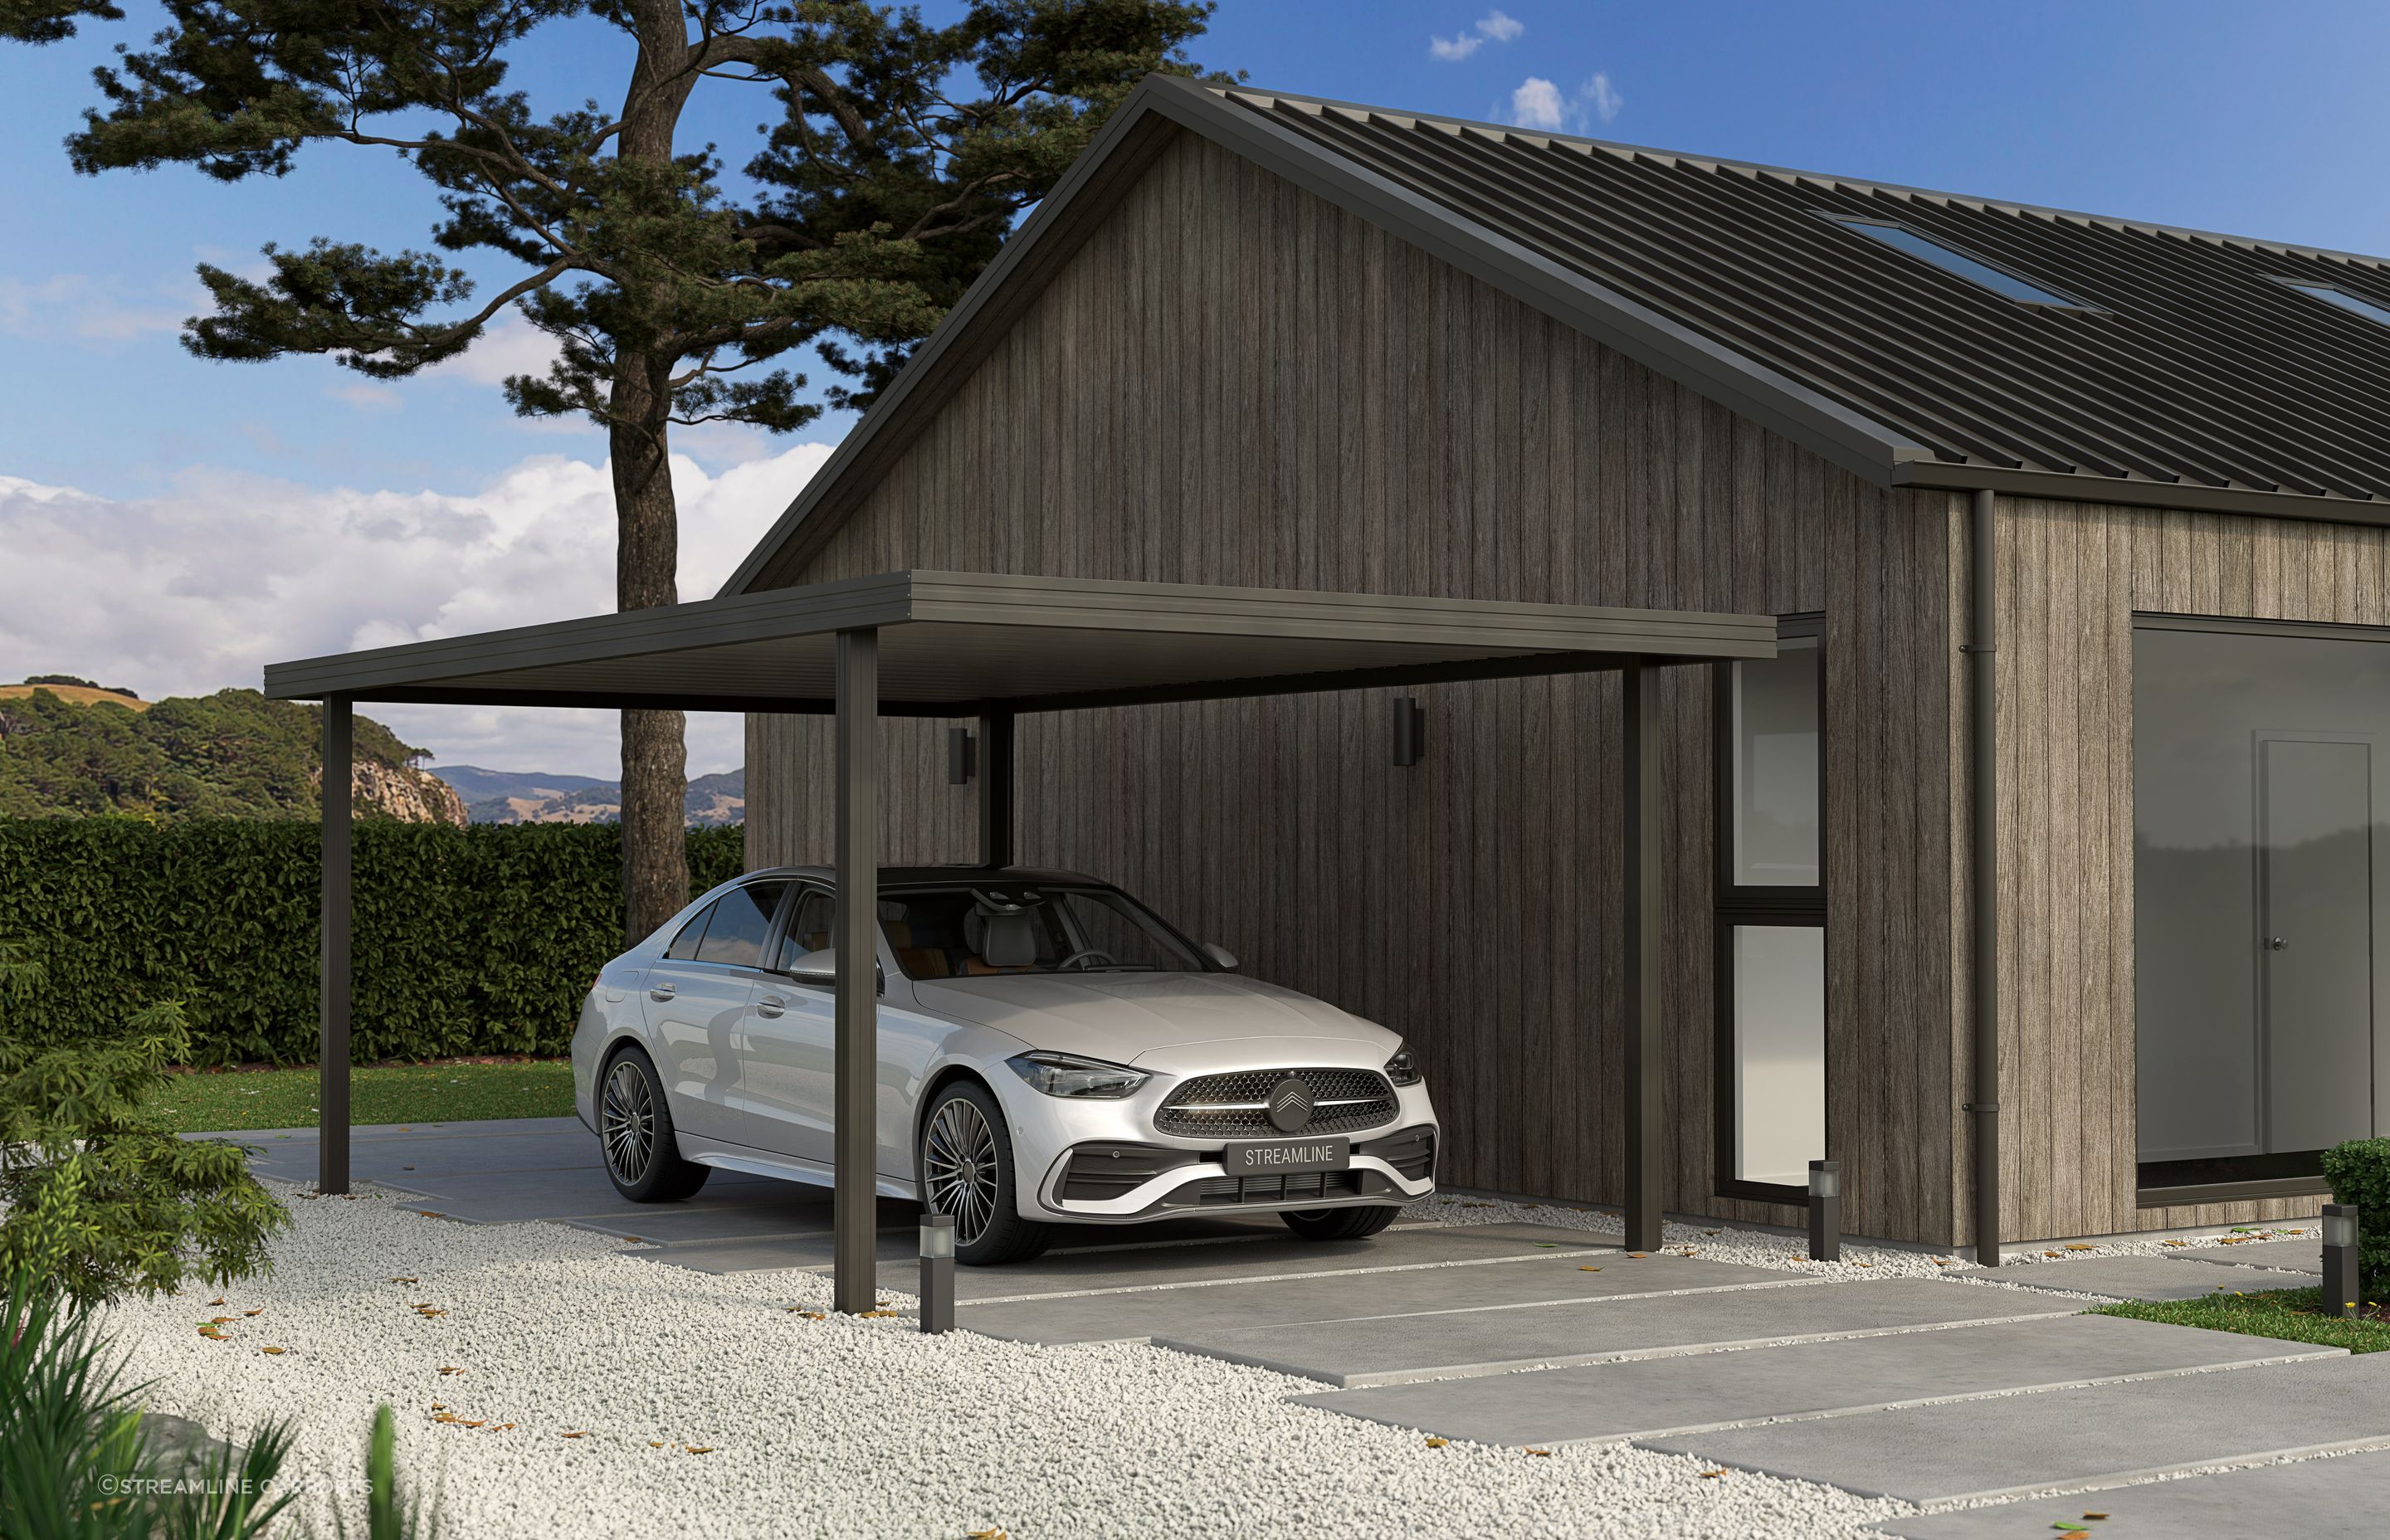 Streamline Carports are designed for easy installation, and every kitset comes with a complete set of assembly instructions for the homeowner or builder to follow.